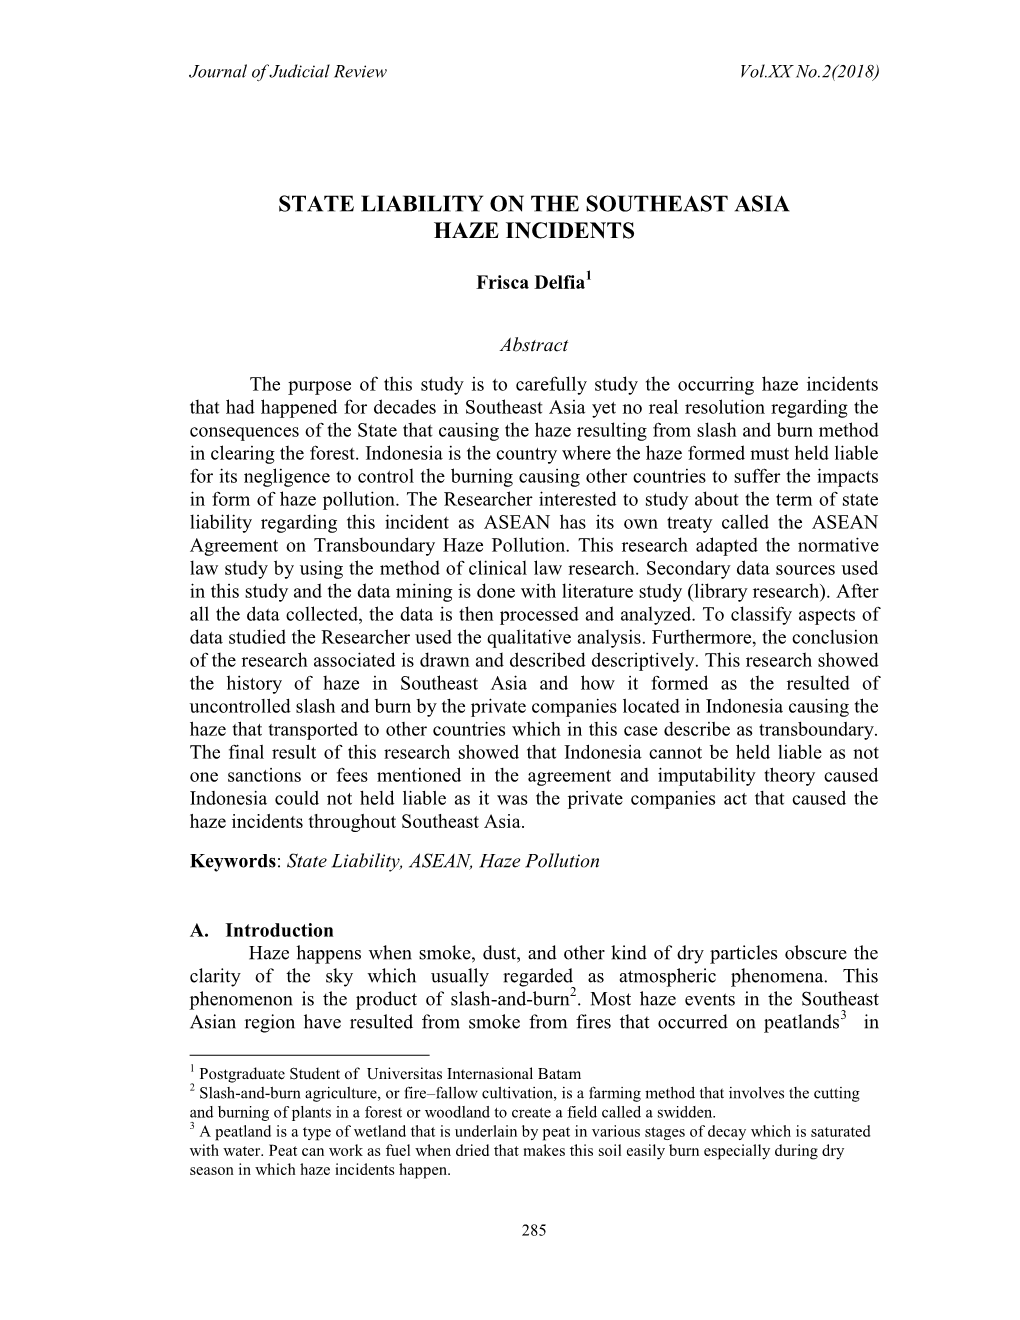 State Liability on the Southeast Asia Haze Incidents